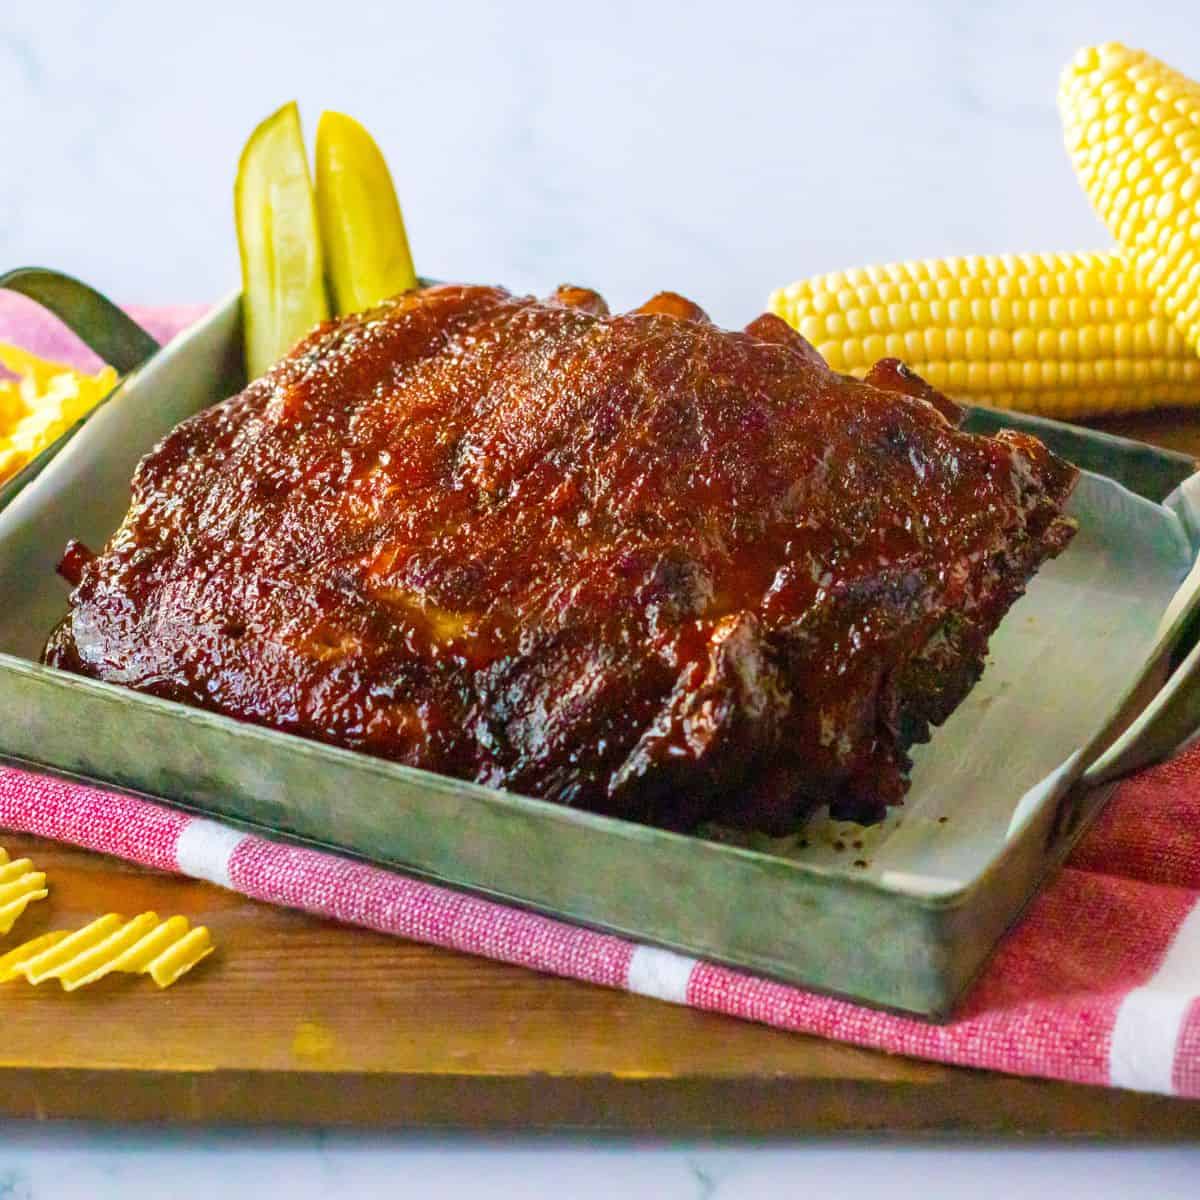 featured size barbecue and crock pot ribs on serving tray.